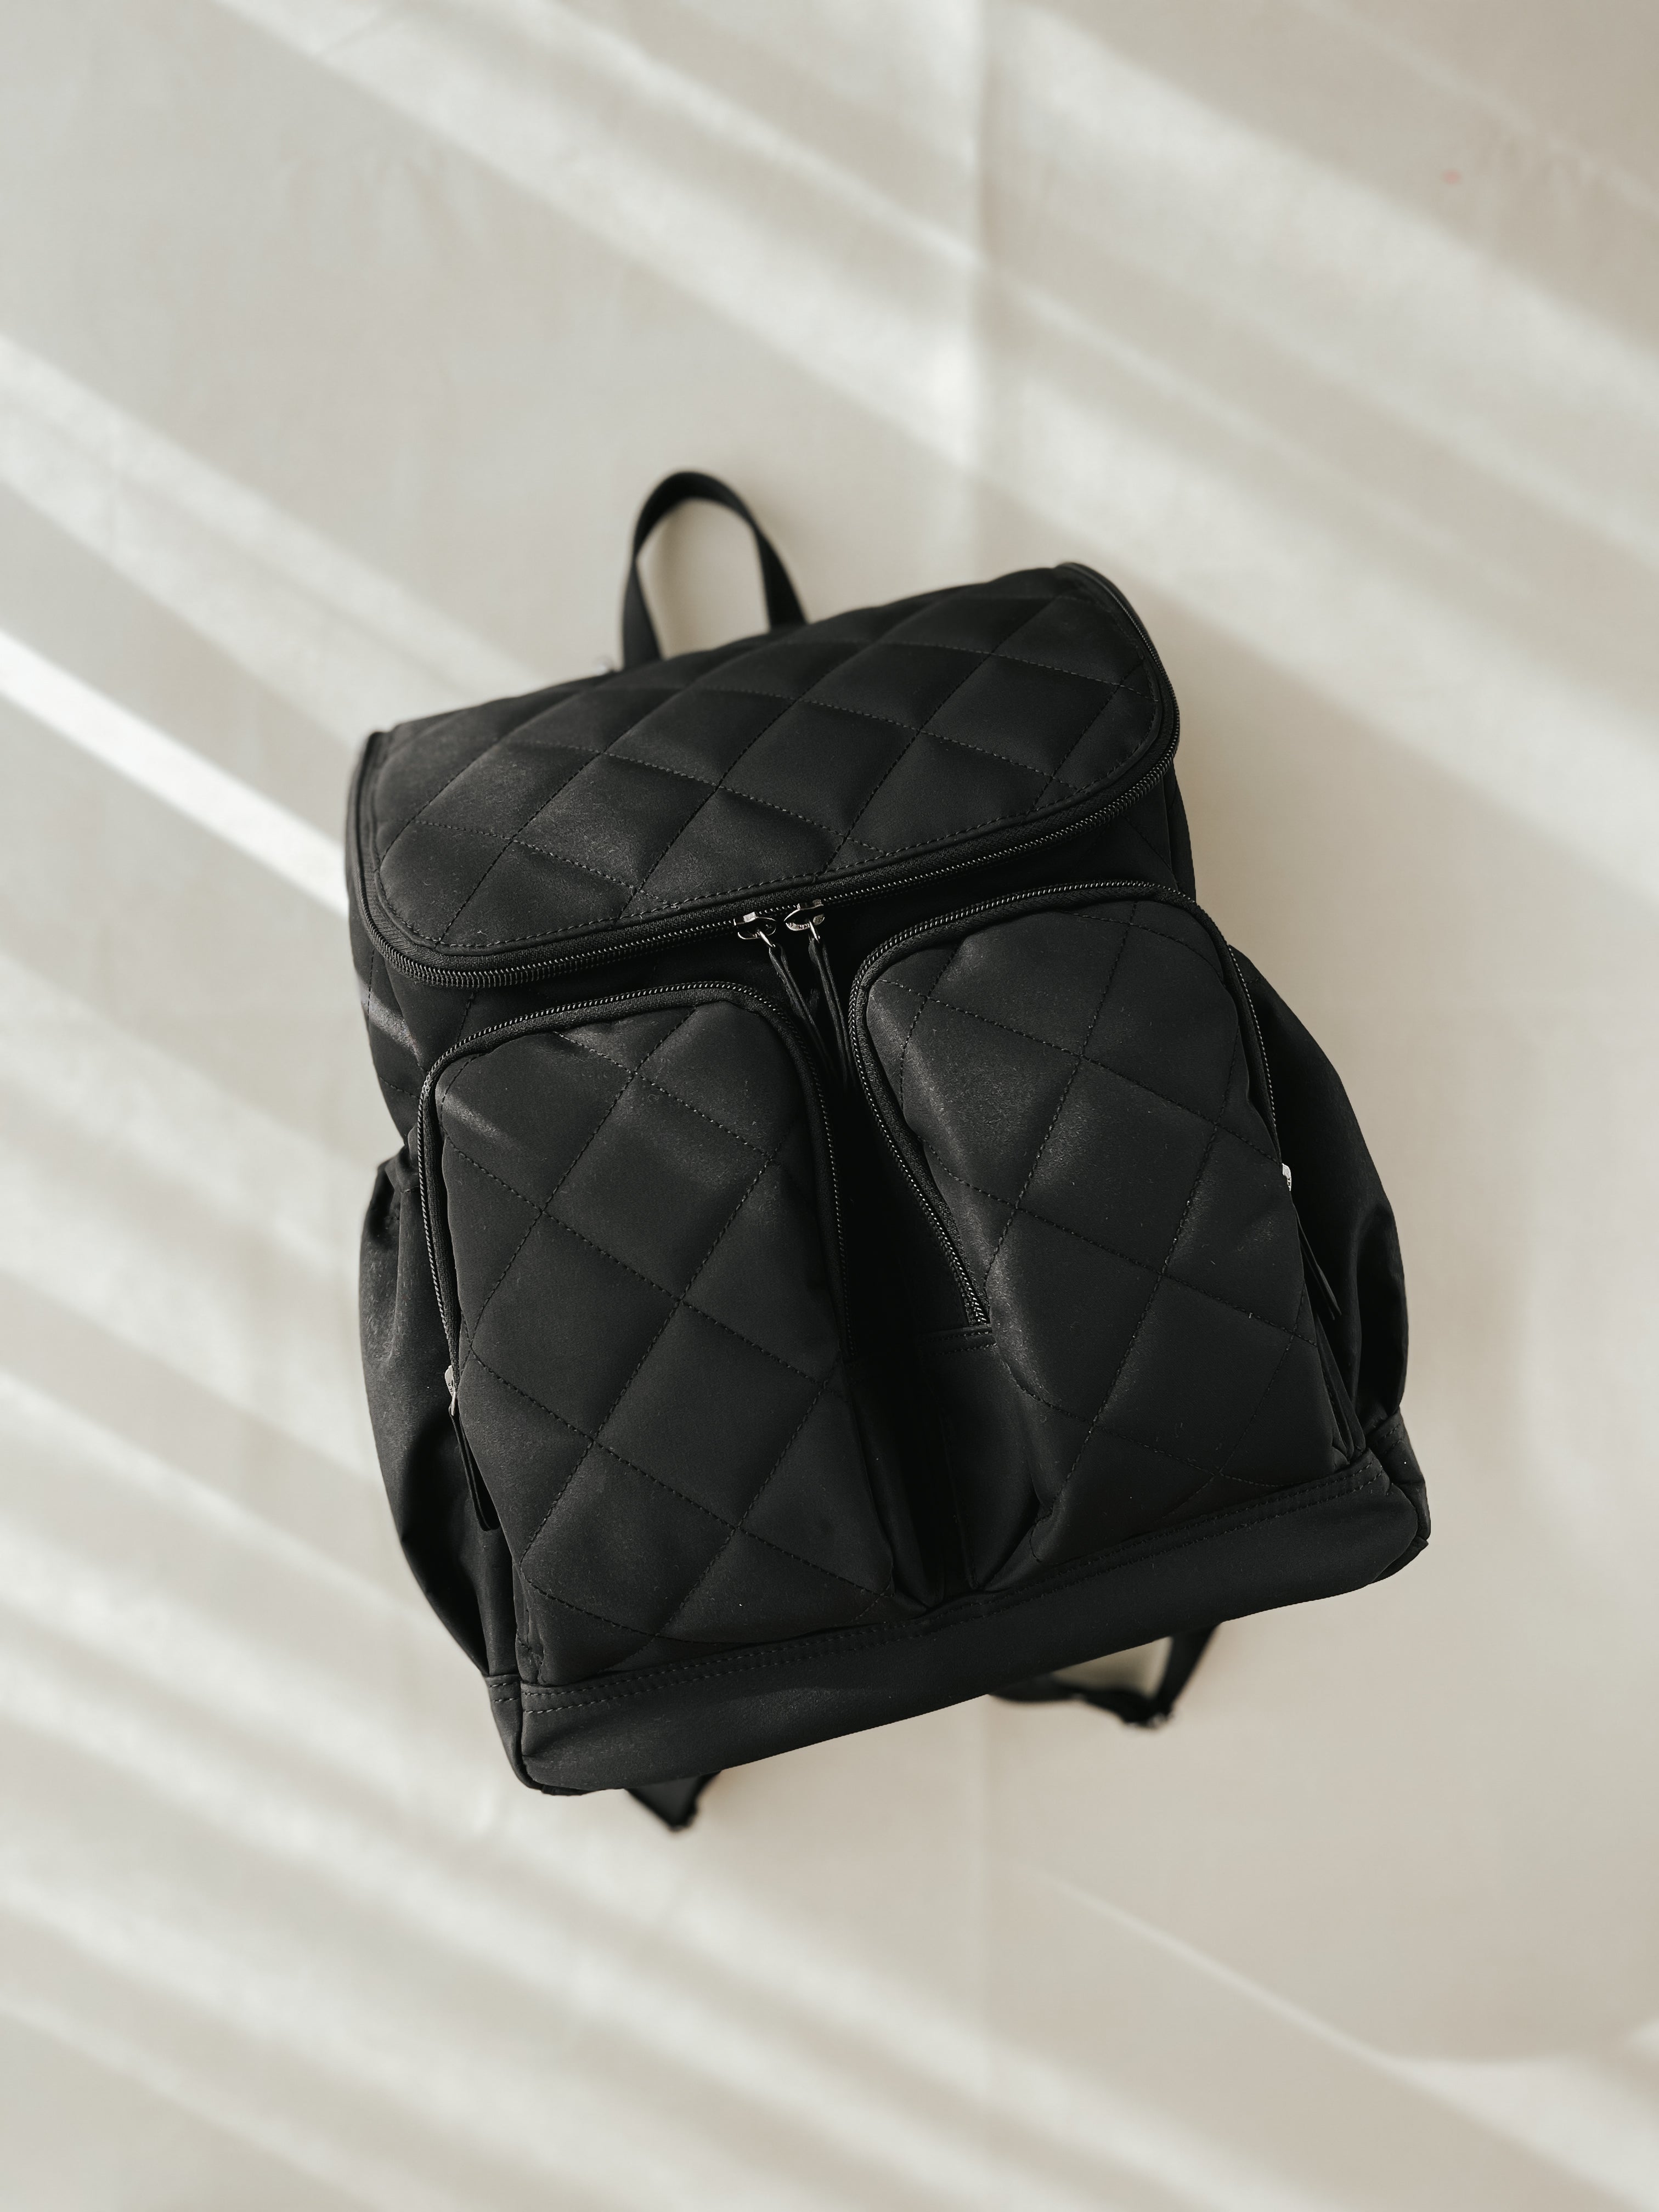 OiOi Diamond Quilt Nappy Backpack Black